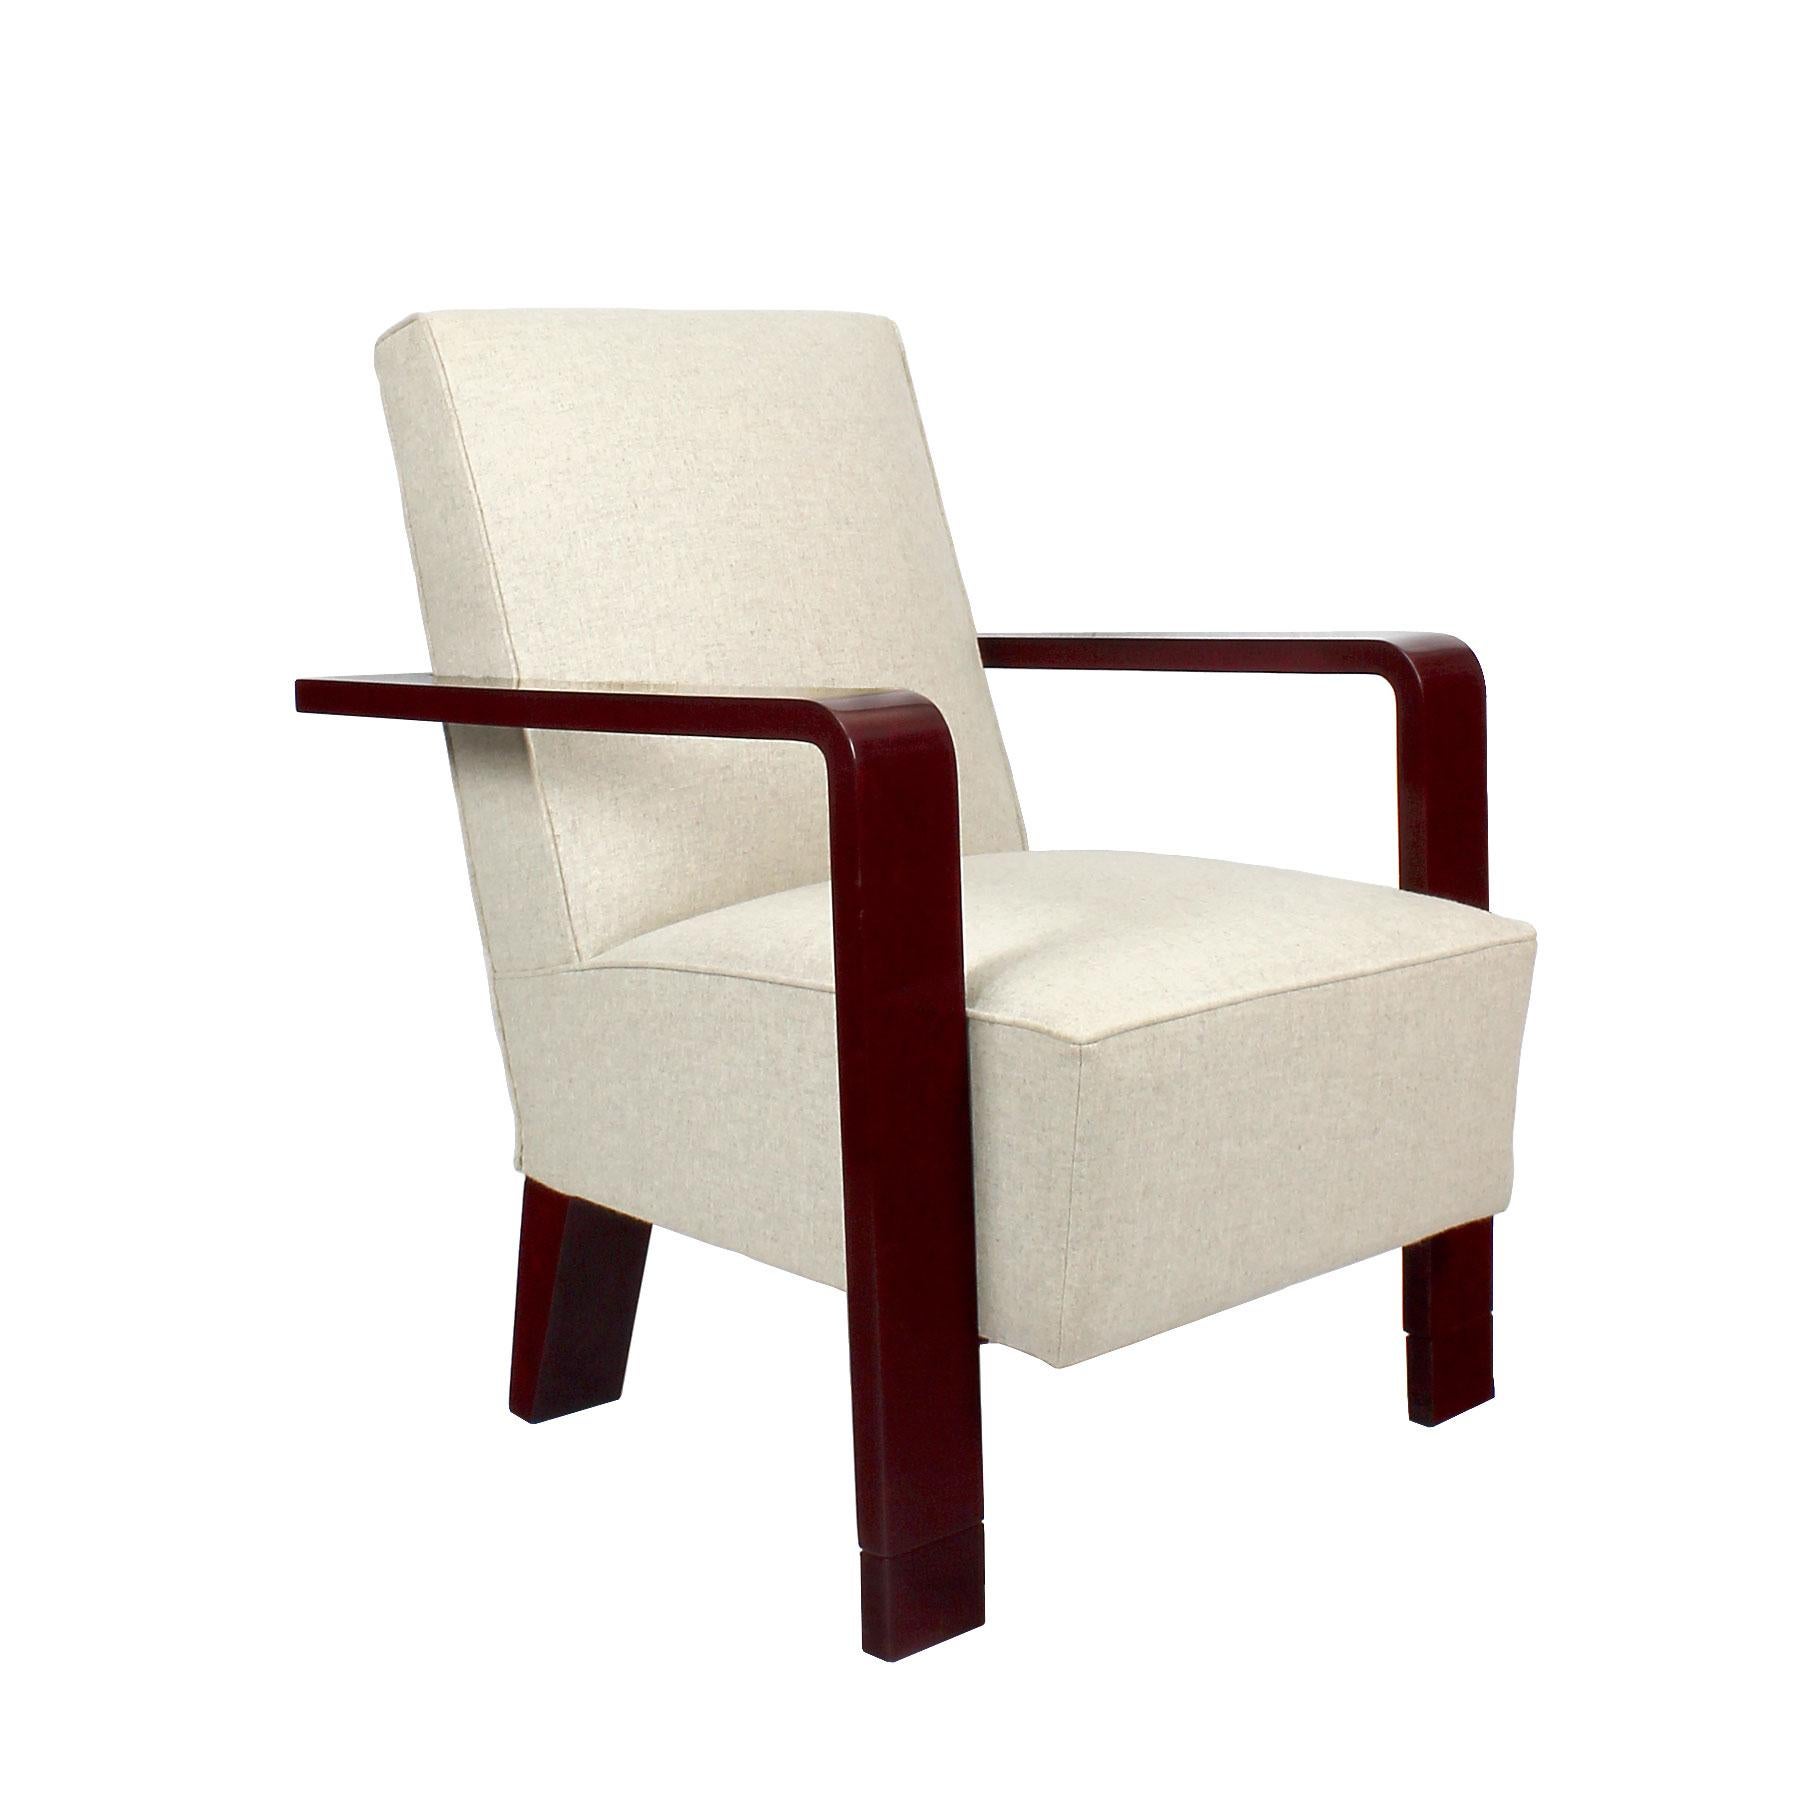 Belgian 1930s Art Deco Armchair, Lacquered Beech, Off-White Wool - Belgium For Sale